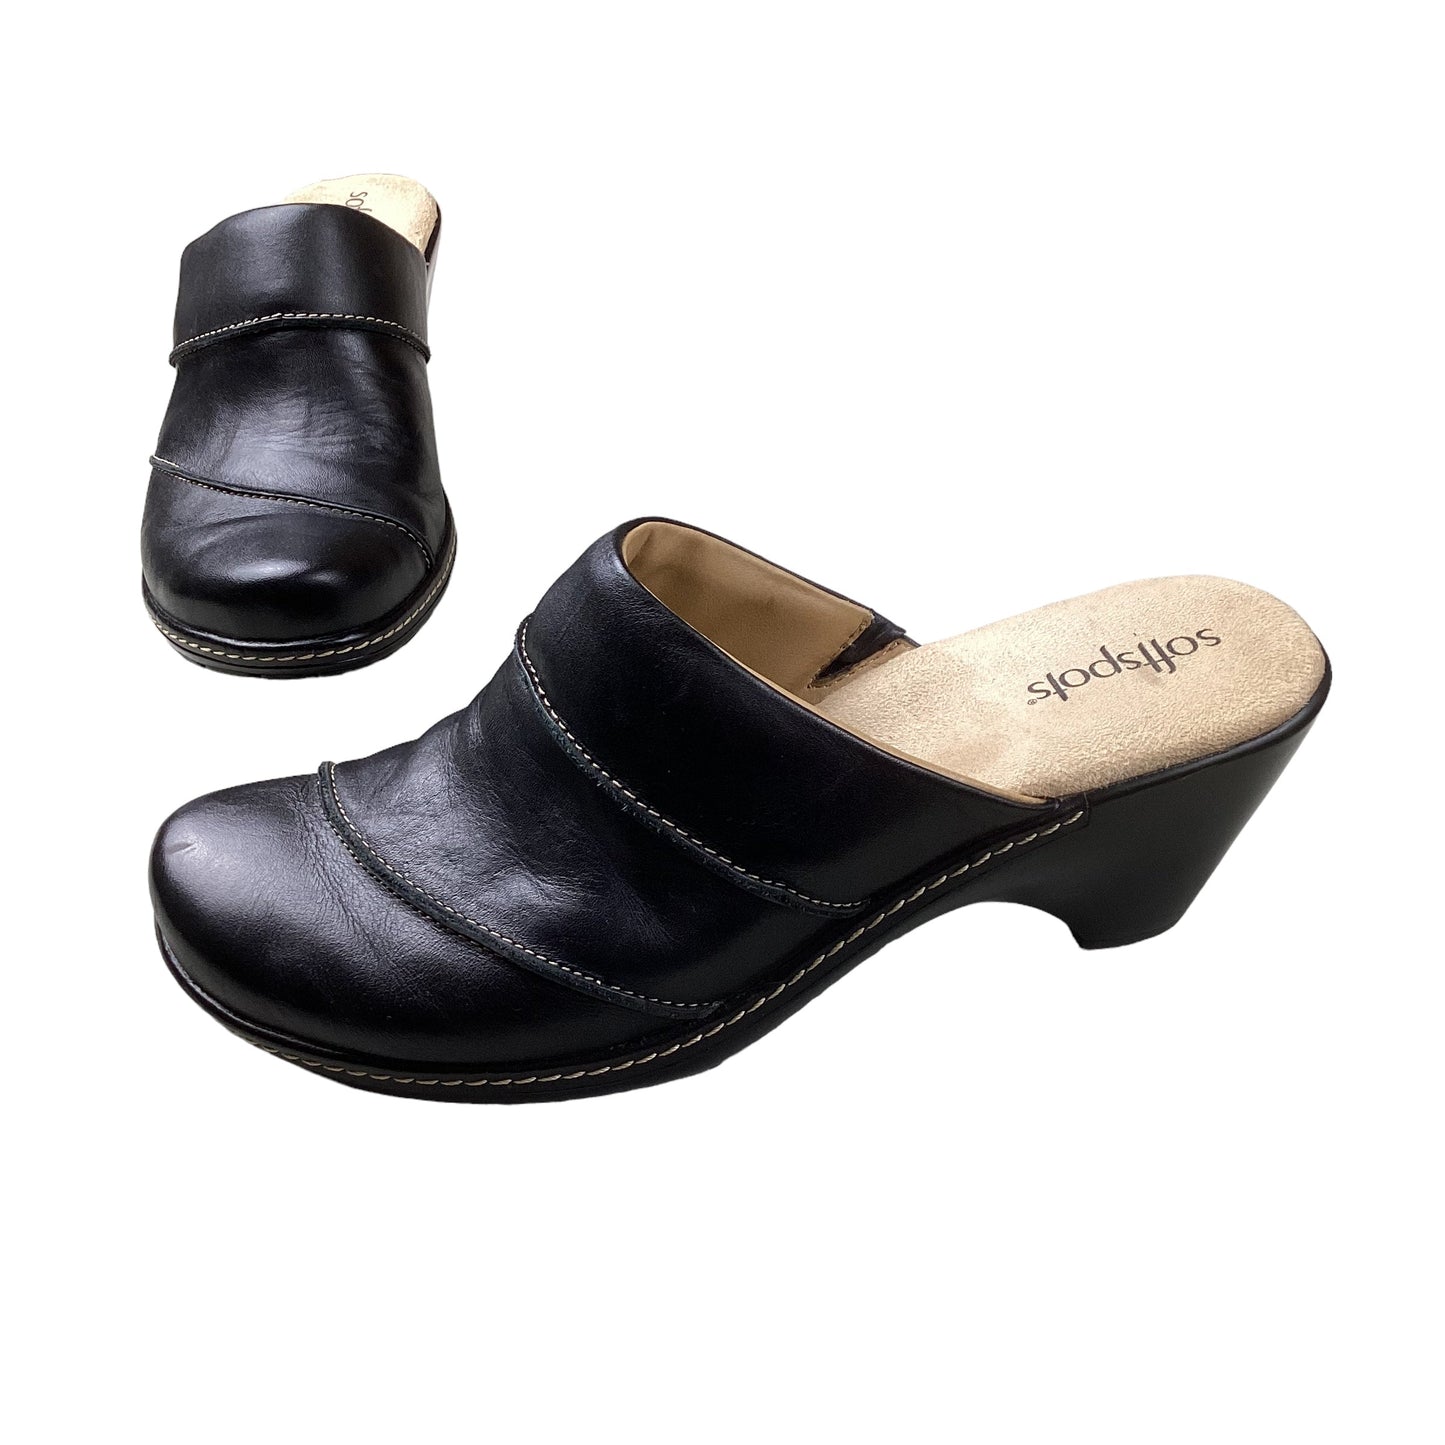 Black Shoes Heels Wedge Softspots, Size 9